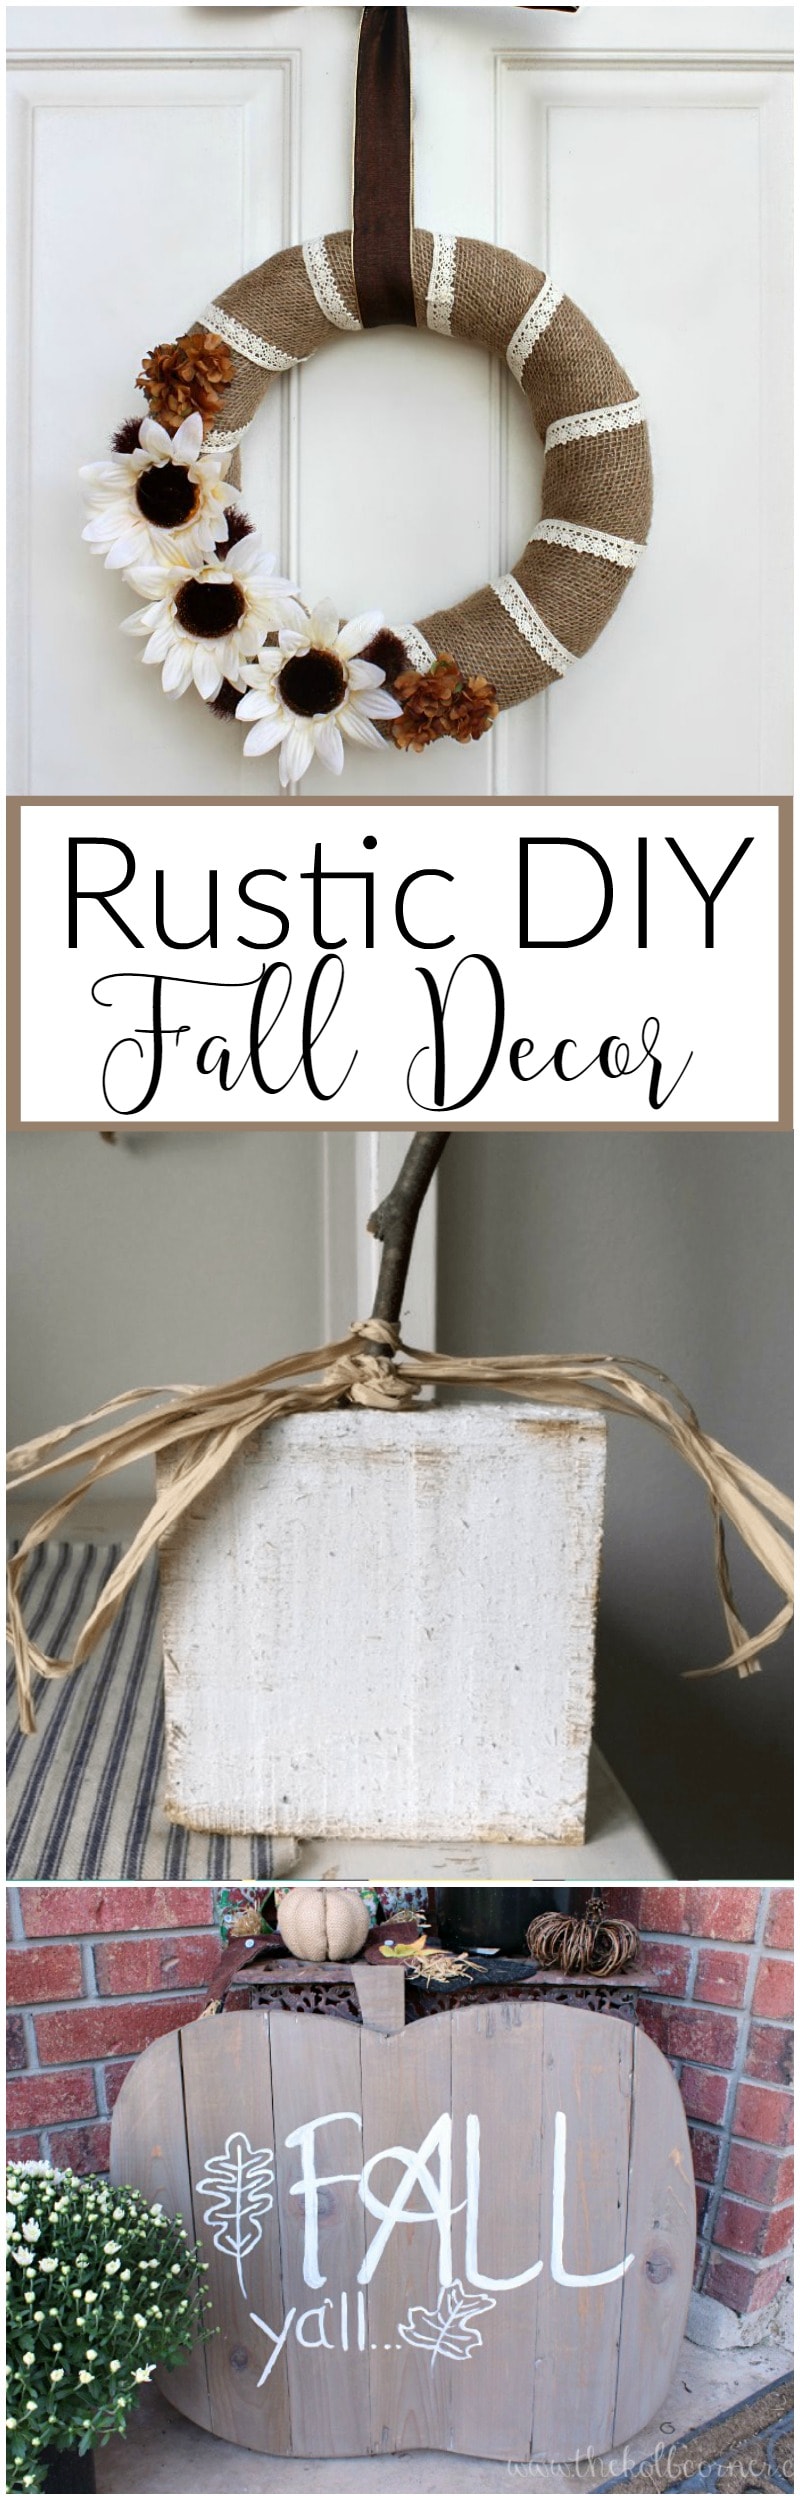 Here's a collection of some of the most creative Rustic DIY Fall Decor ideas you can use in your own home this Fall season.